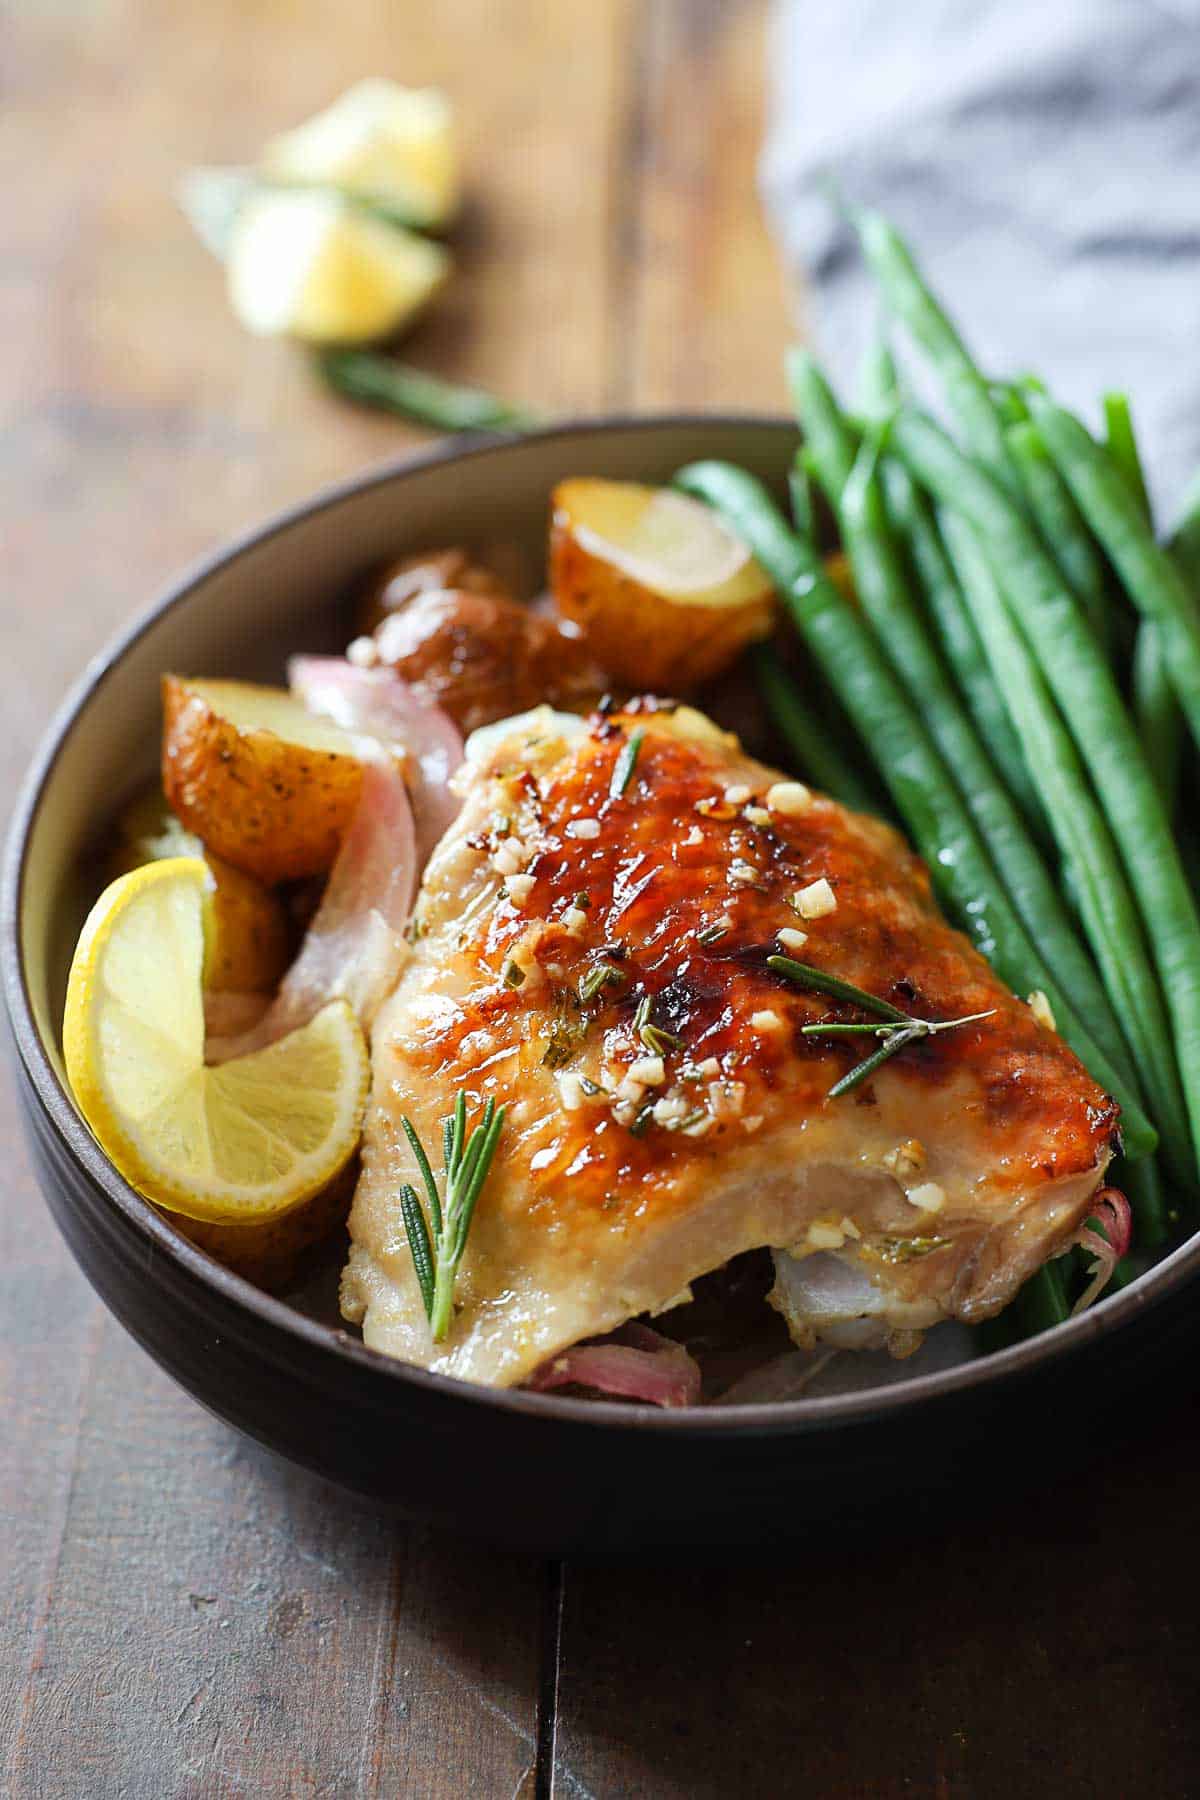 Rosemary Lemon Chicken with green beans and baby potatoes in a bowl.